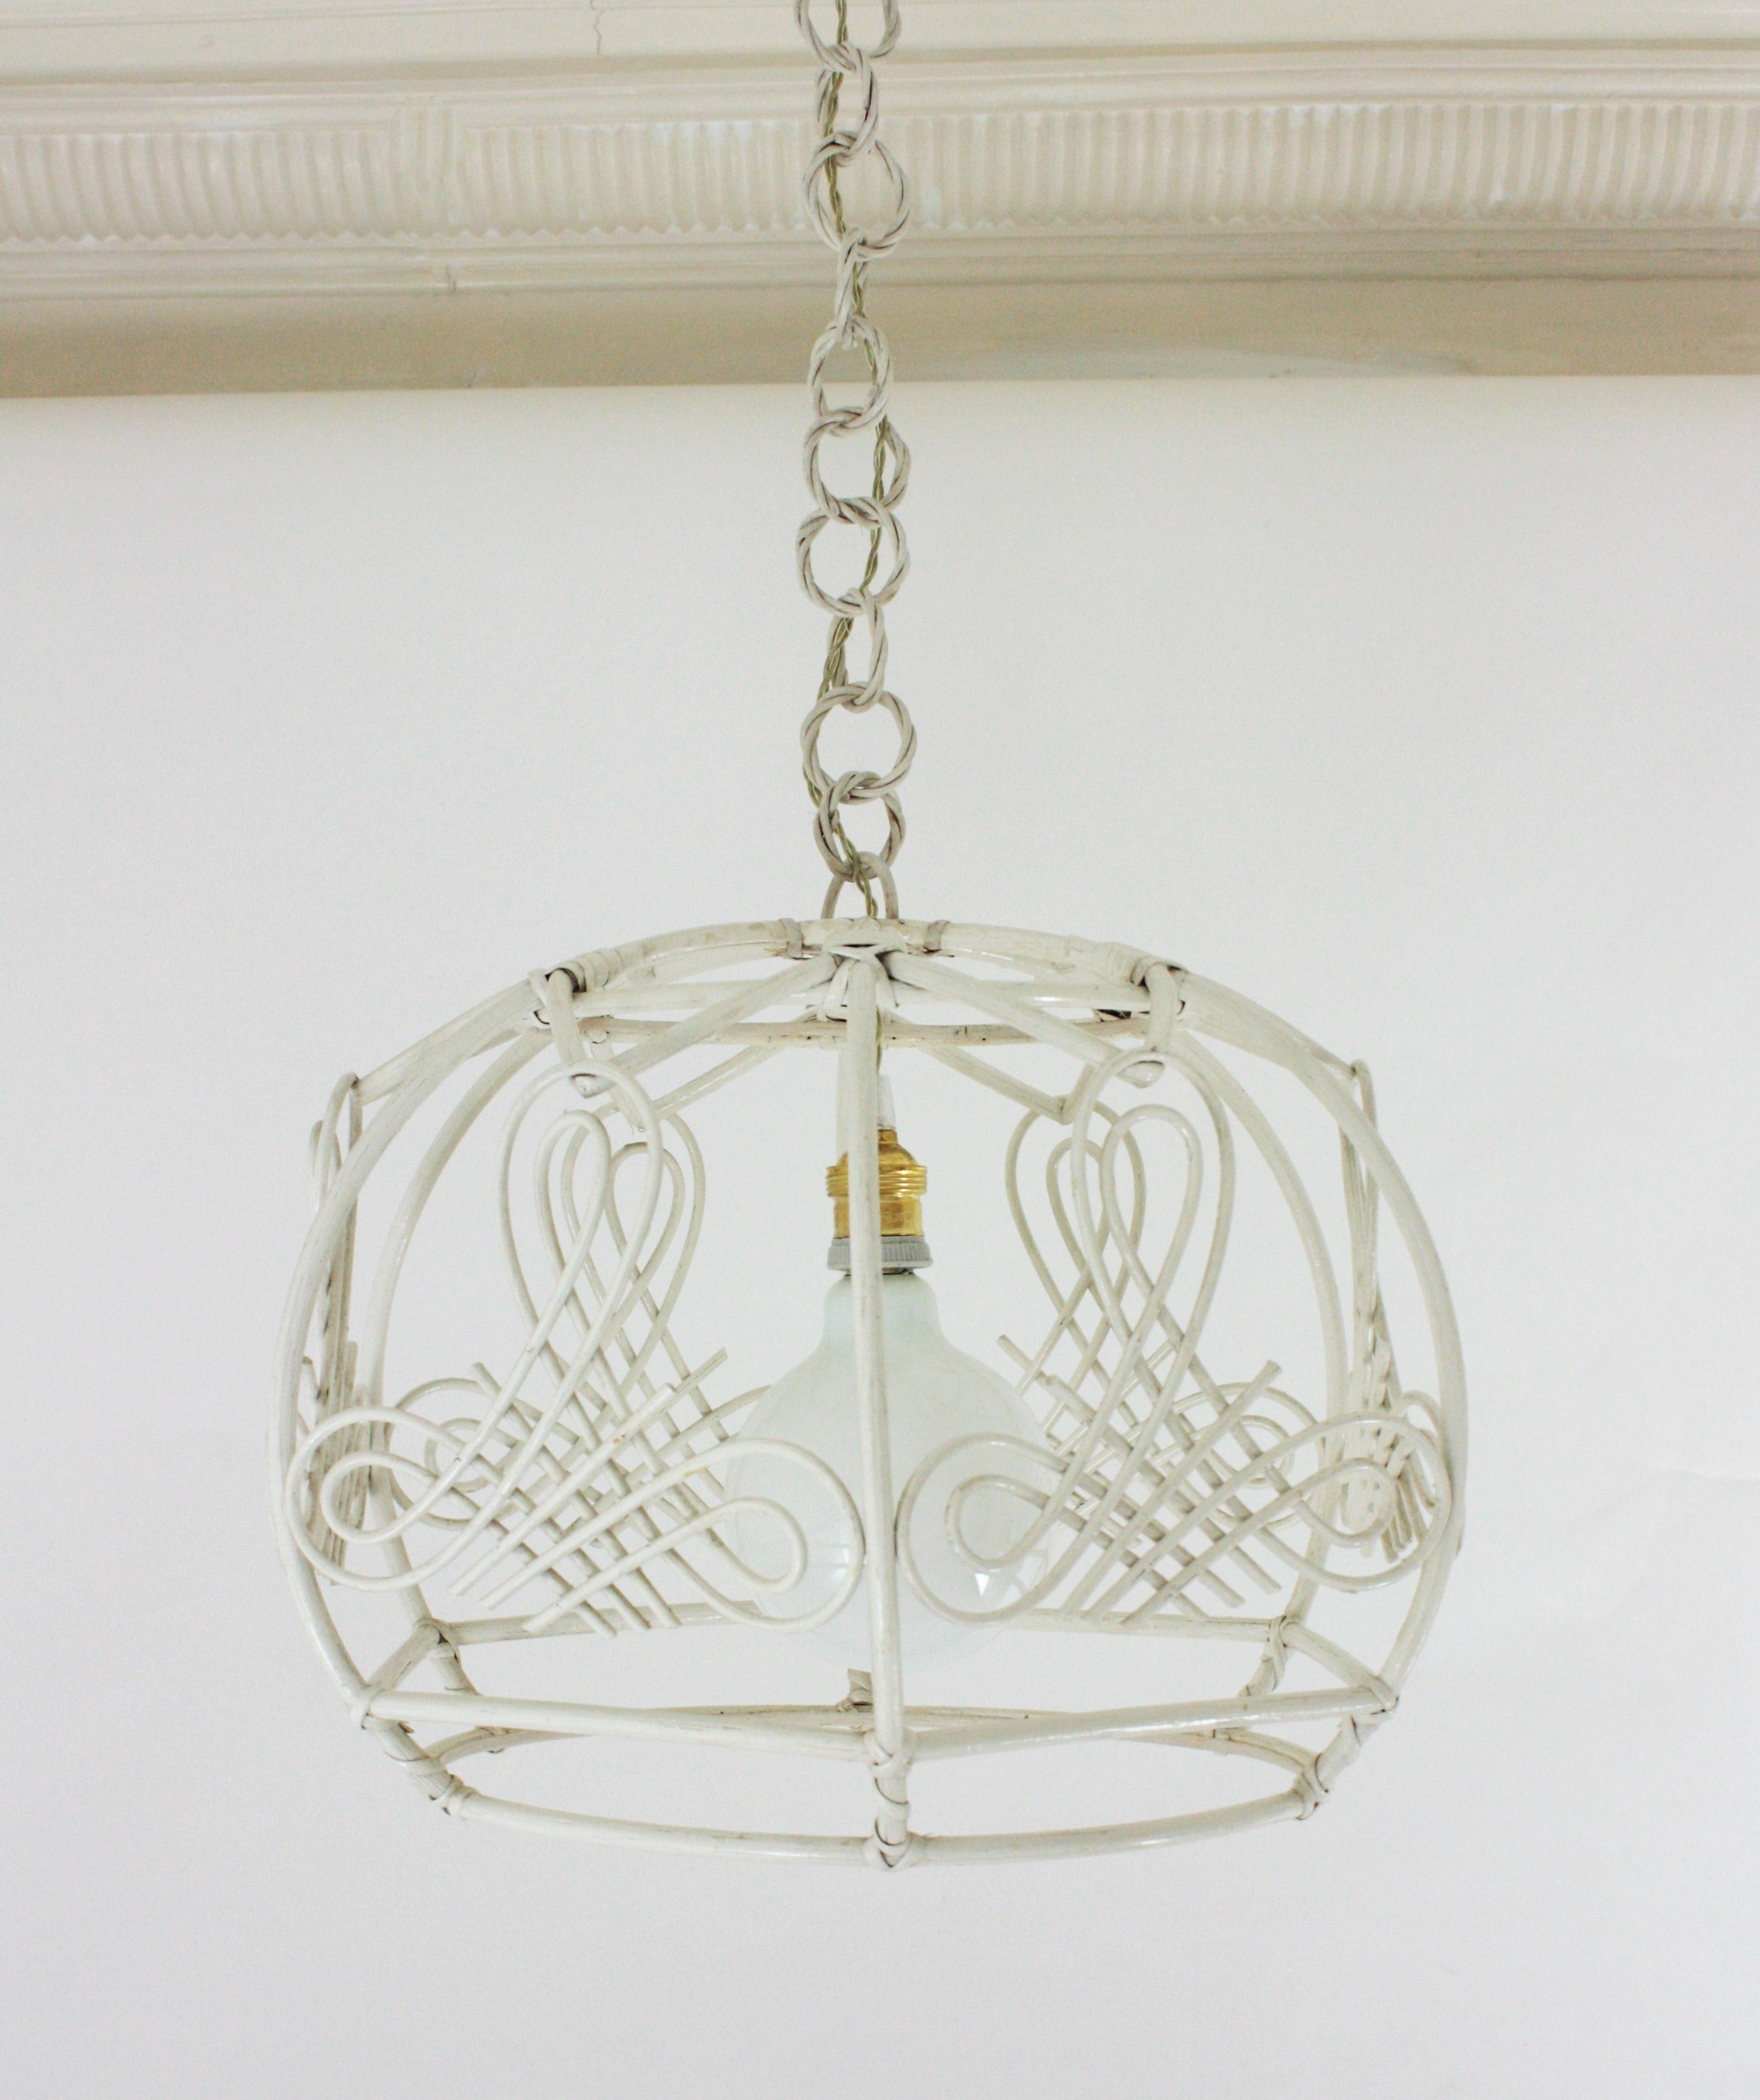 20th Century French Rattan Bell Pendant Lamp / Lantern in White Patina, 1960s For Sale